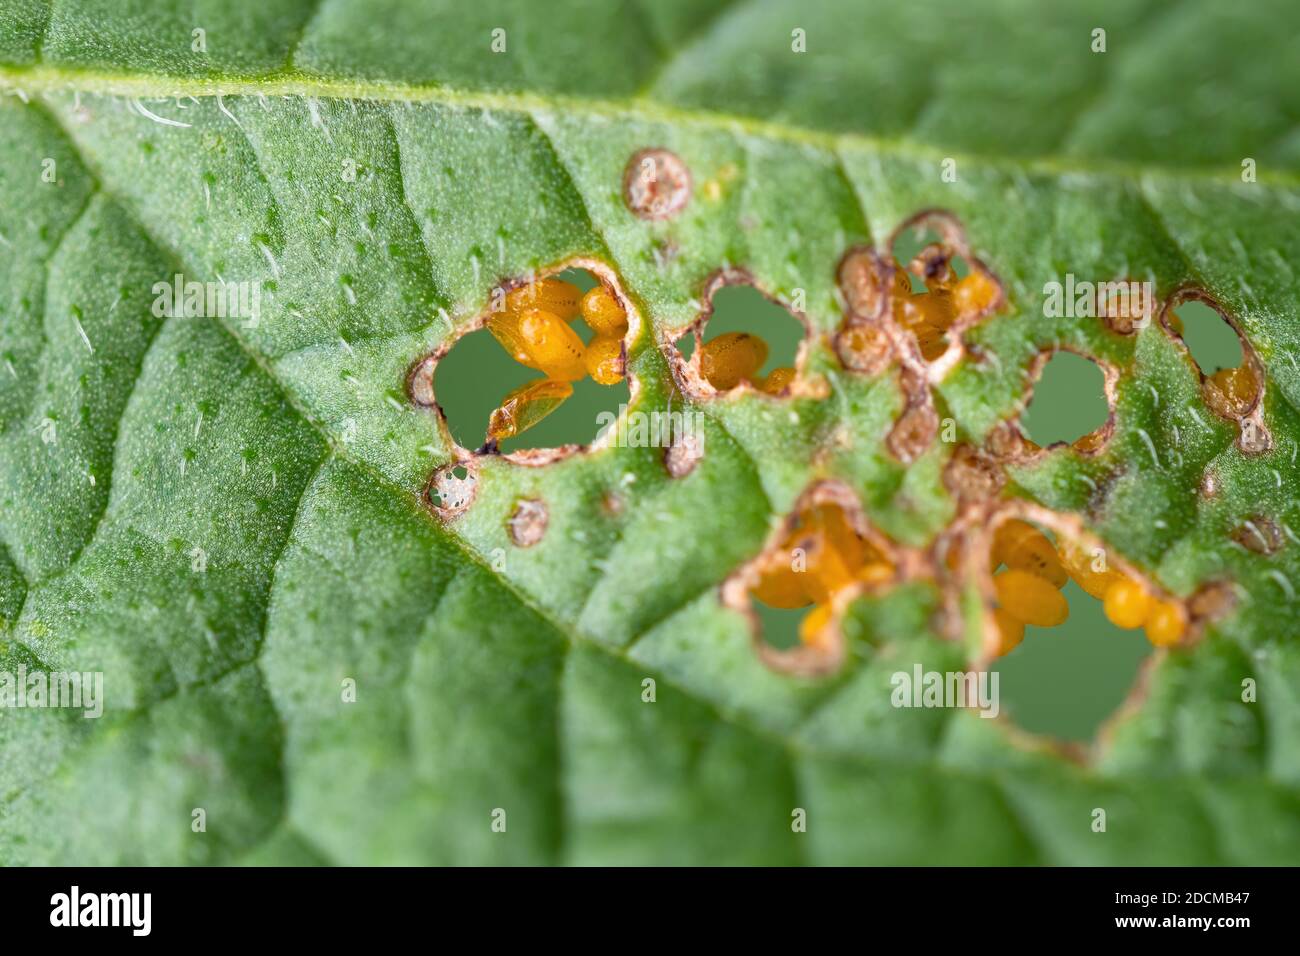 Leaf of potato plant with eggs of Colorado beetle (Leptinotarsa decemlineata) visible through holes. Close-up of insect pest causing huge damage to ha Stock Photo